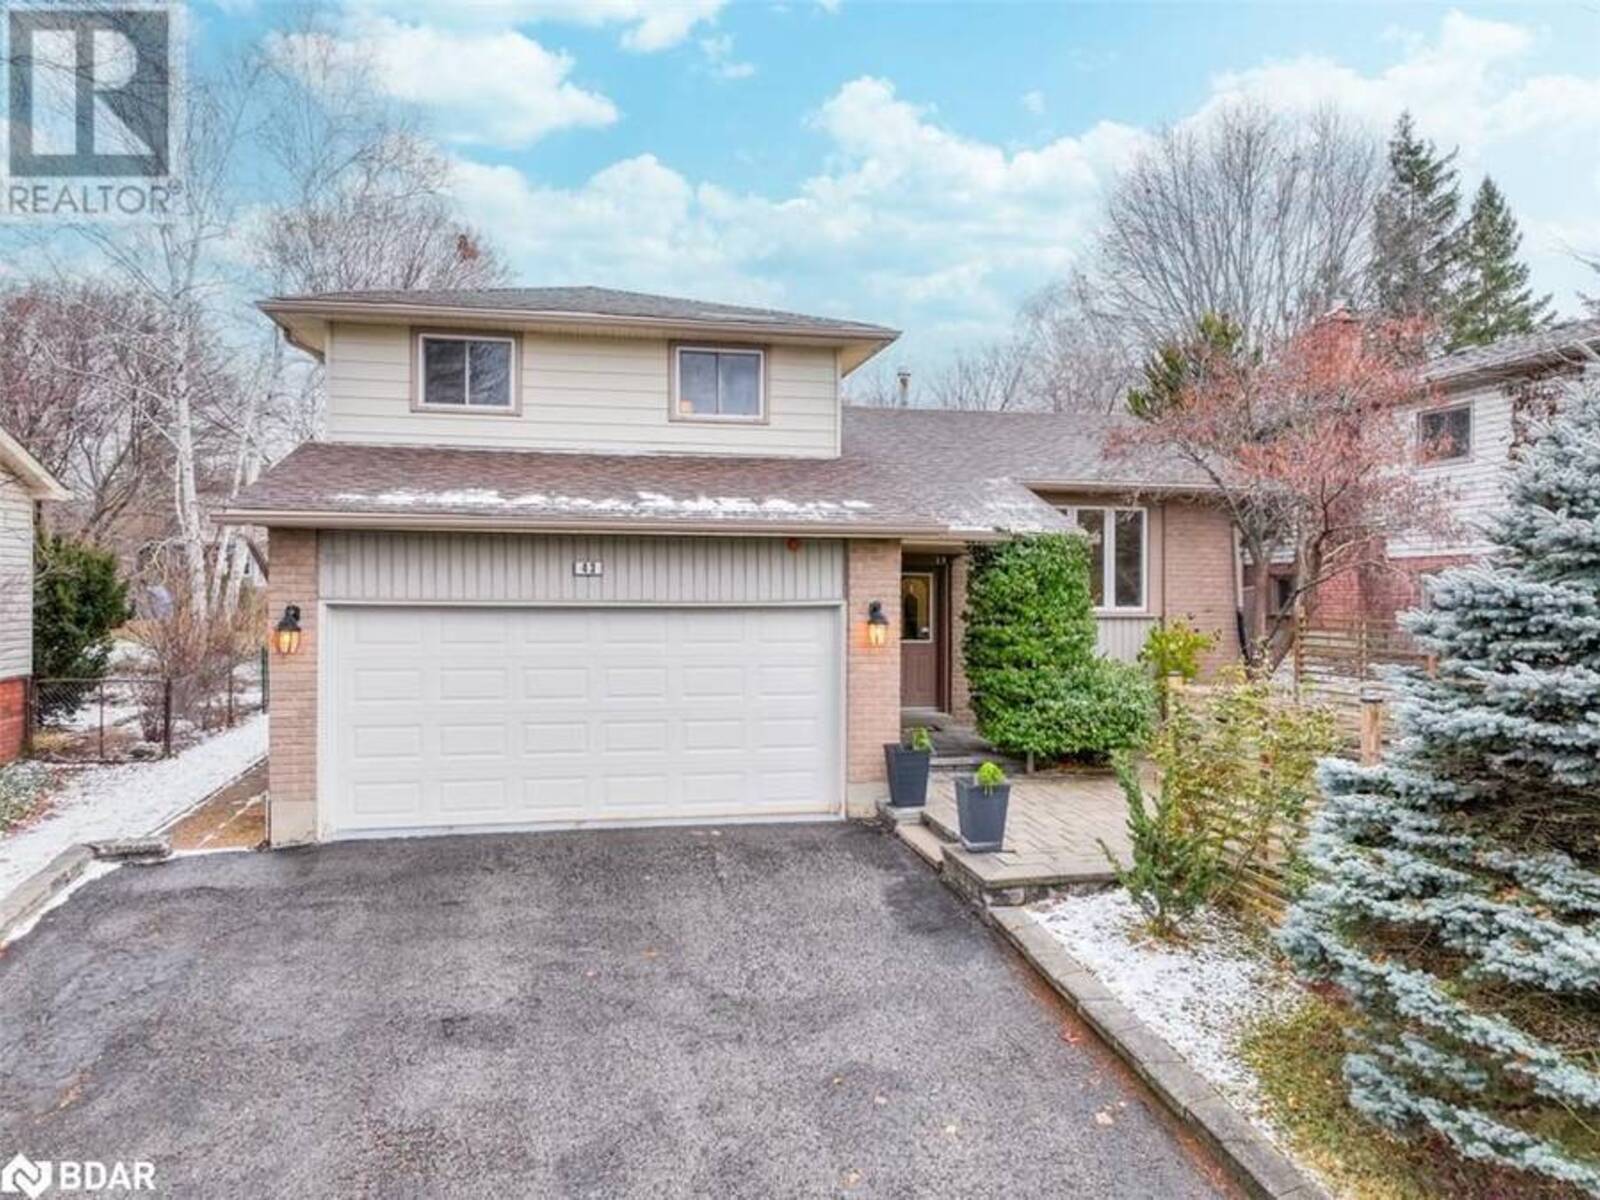 43 SHOREVIEW Drive, Barrie, Ontario L4M 1G2